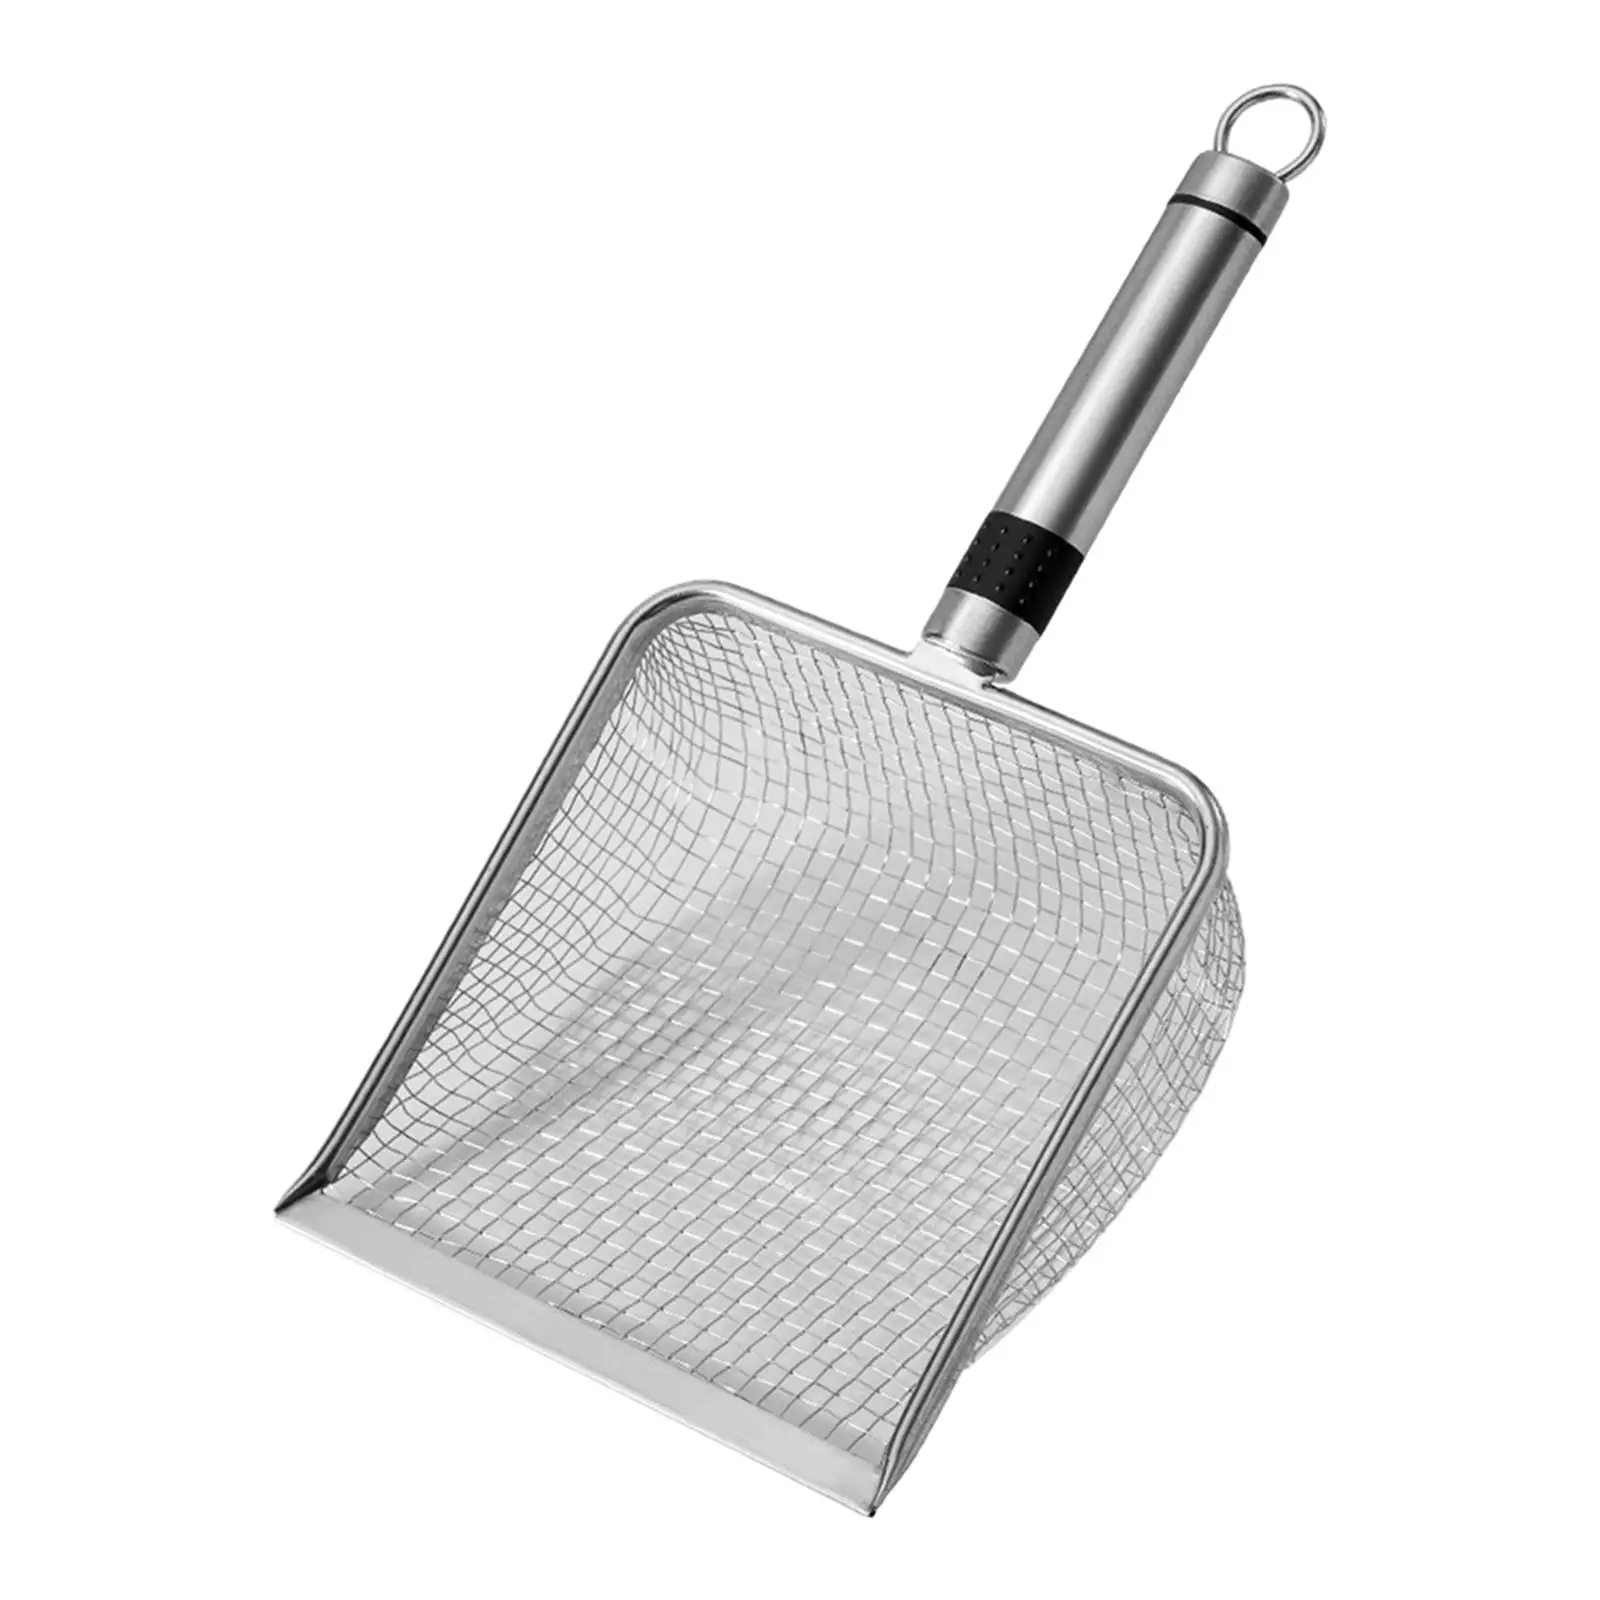 Pets Sifter Shovel Shovel Reptile Sand Shovel Kitty Substrate Durable Cleaning